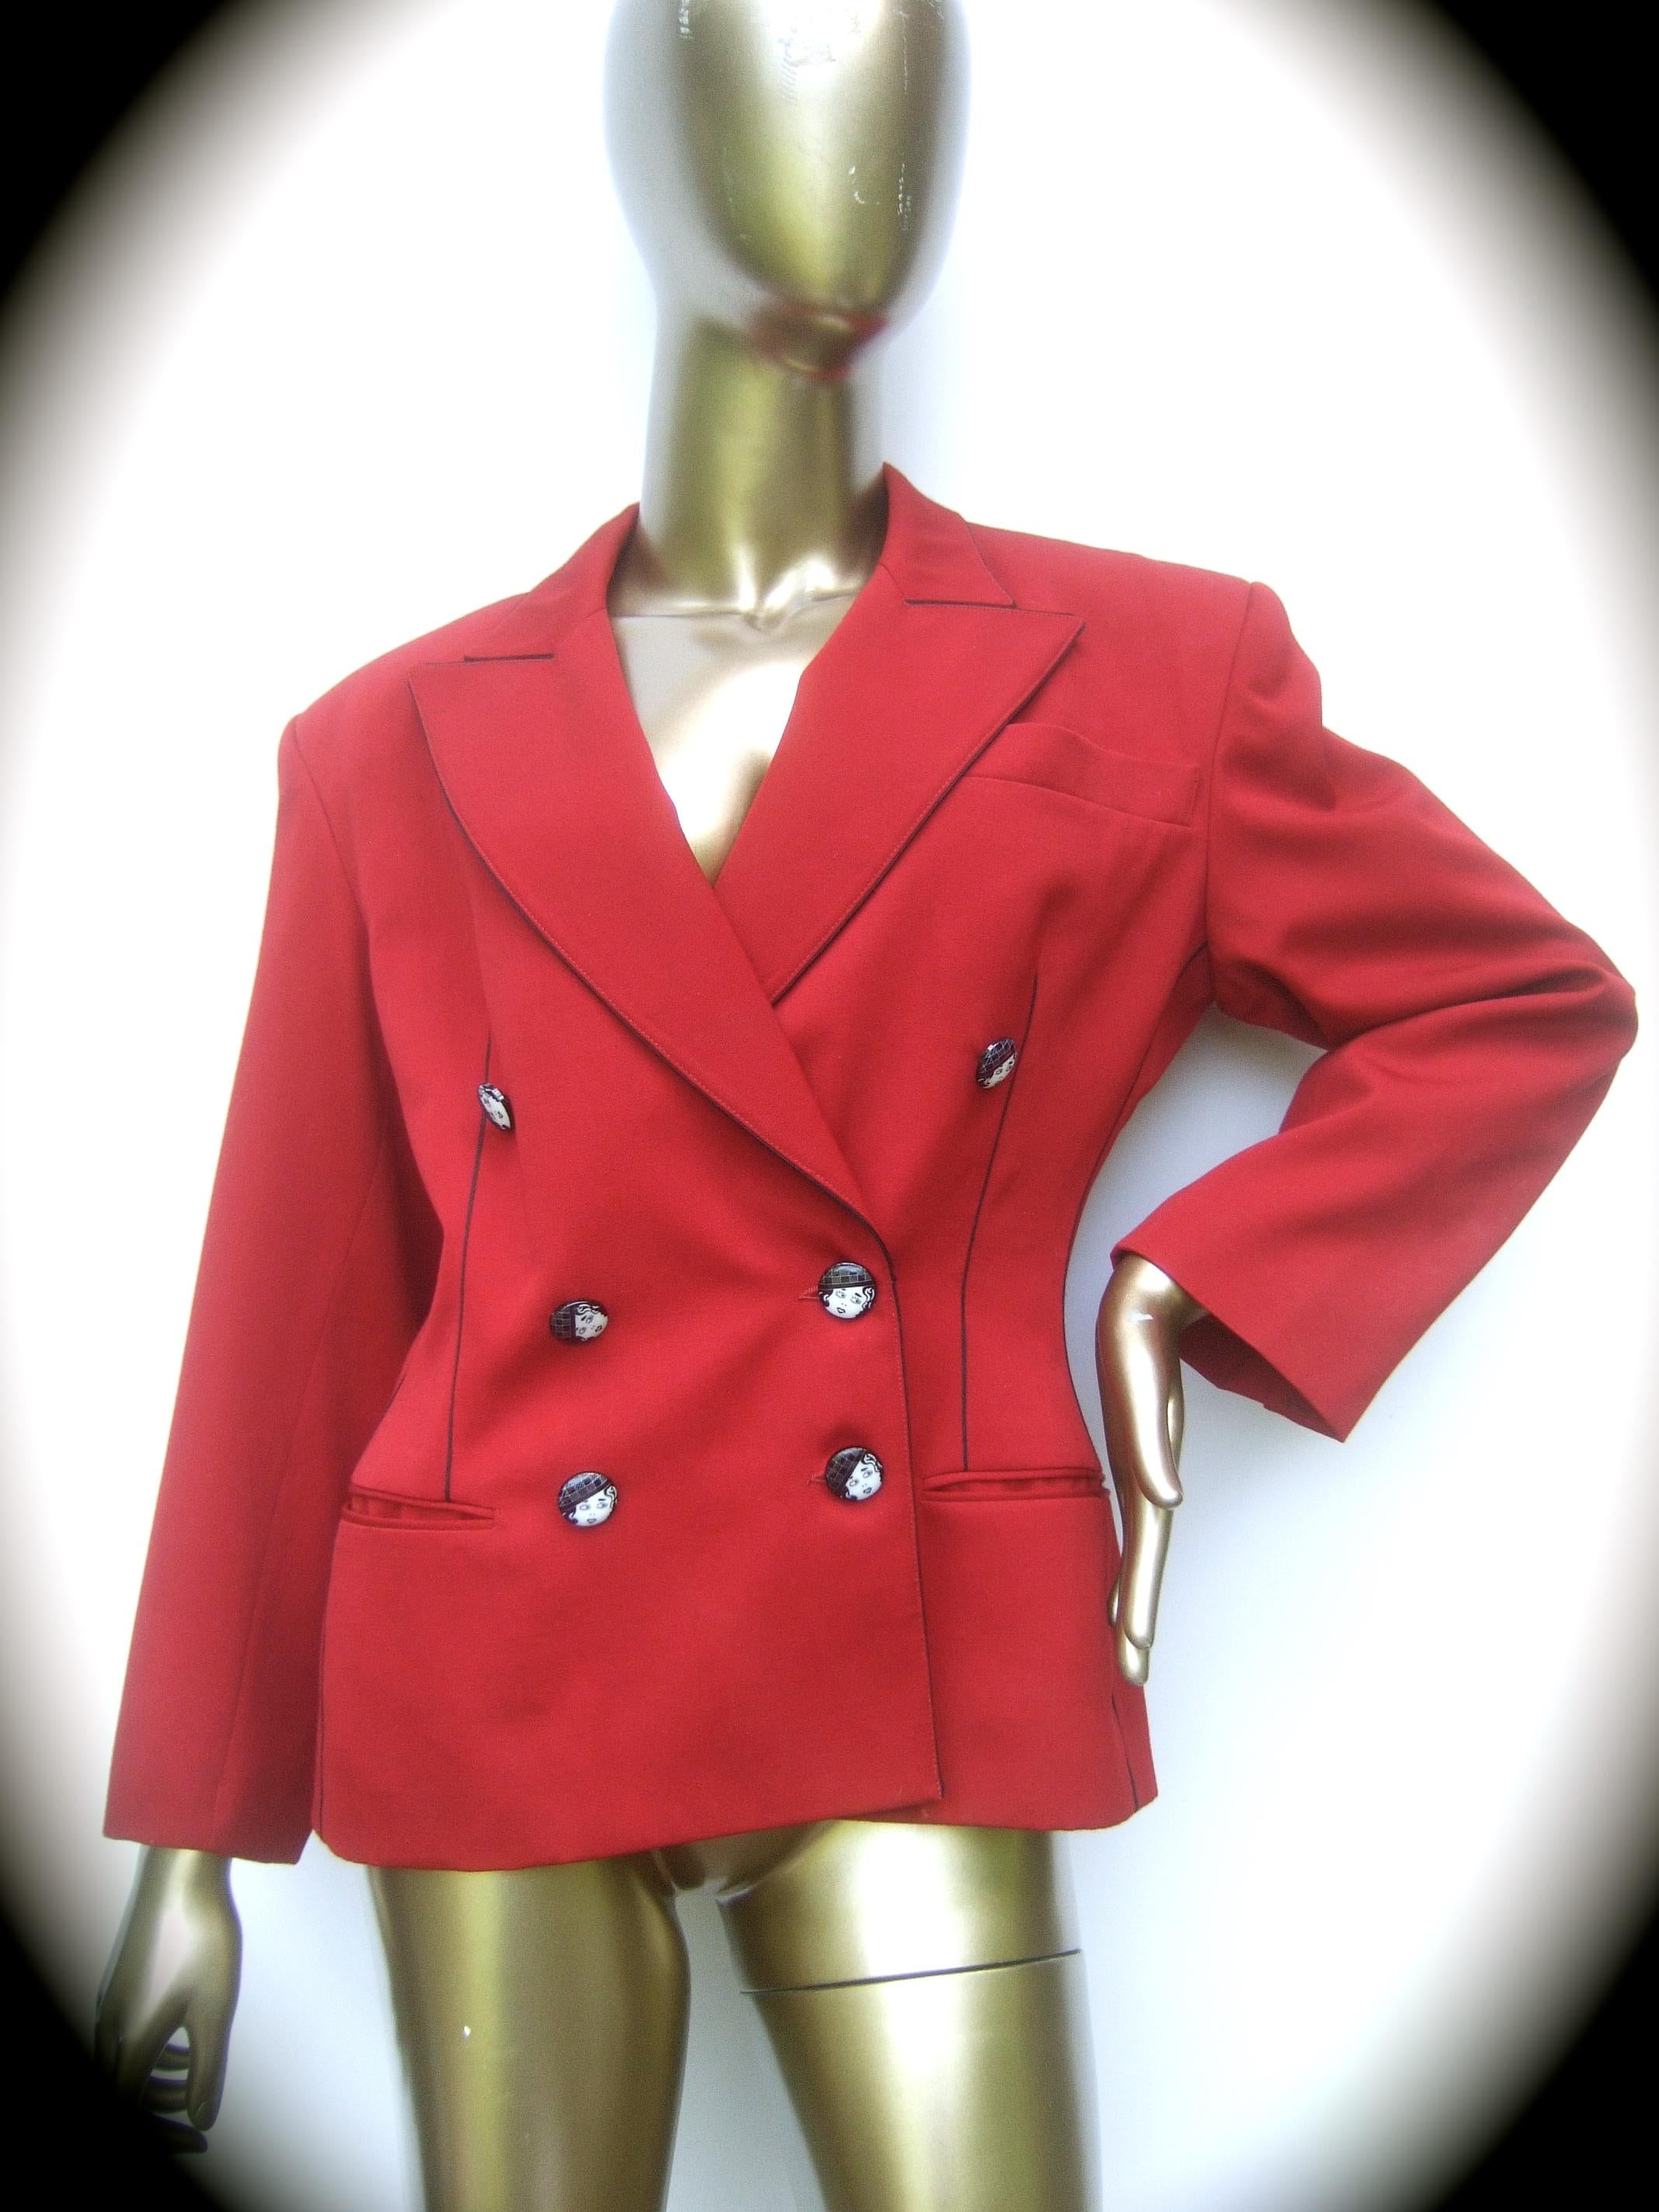 Lolita Lempicka Paris Red wool face button double-breasted blazer jacket French size 40 (vintage)

The stylish red laine wool jacket is adorned with a collection of black and white resin buttons depicting a retro style woman's face. The red laine